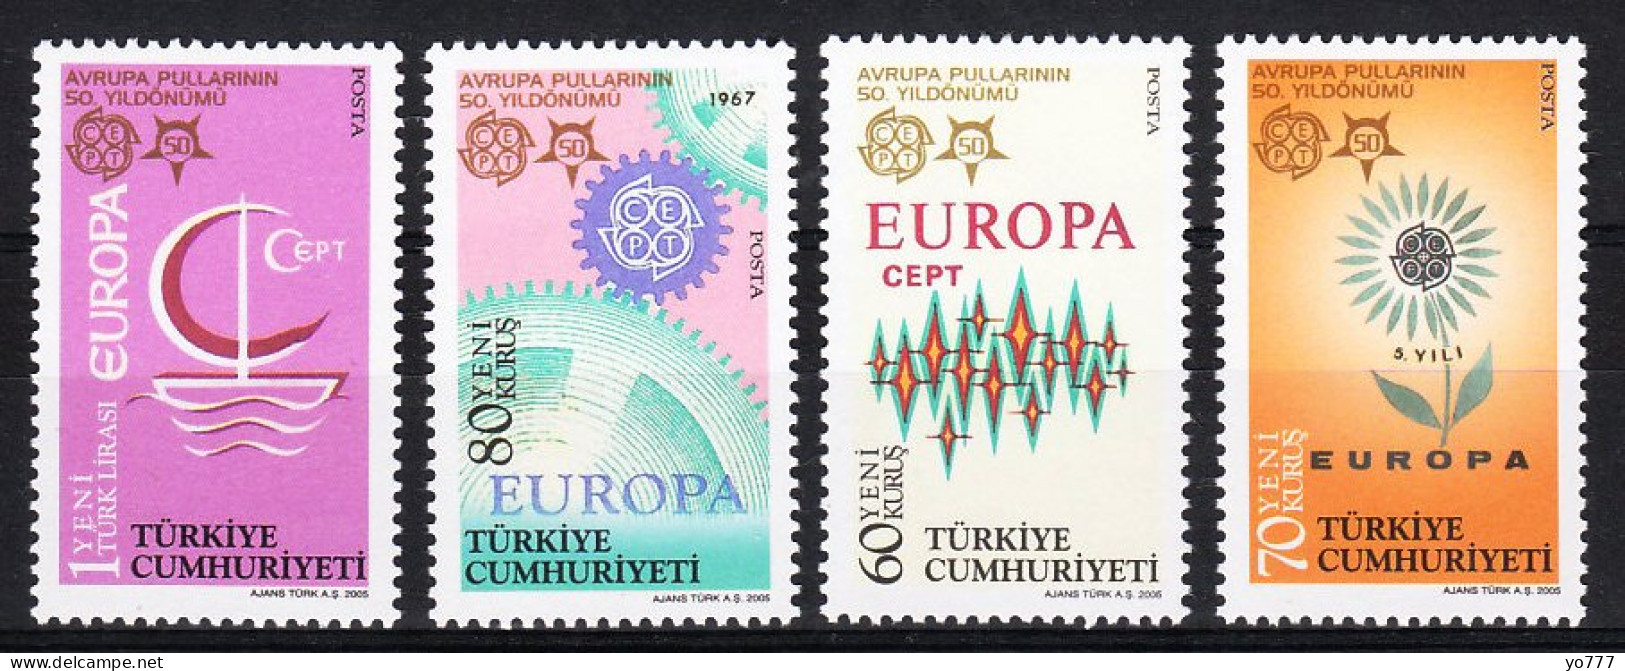 (3487-90) EUROPA (C.E.P.T.) - 50 YEARS OF EUROPA STAMPS SET MNH** - Nuovi